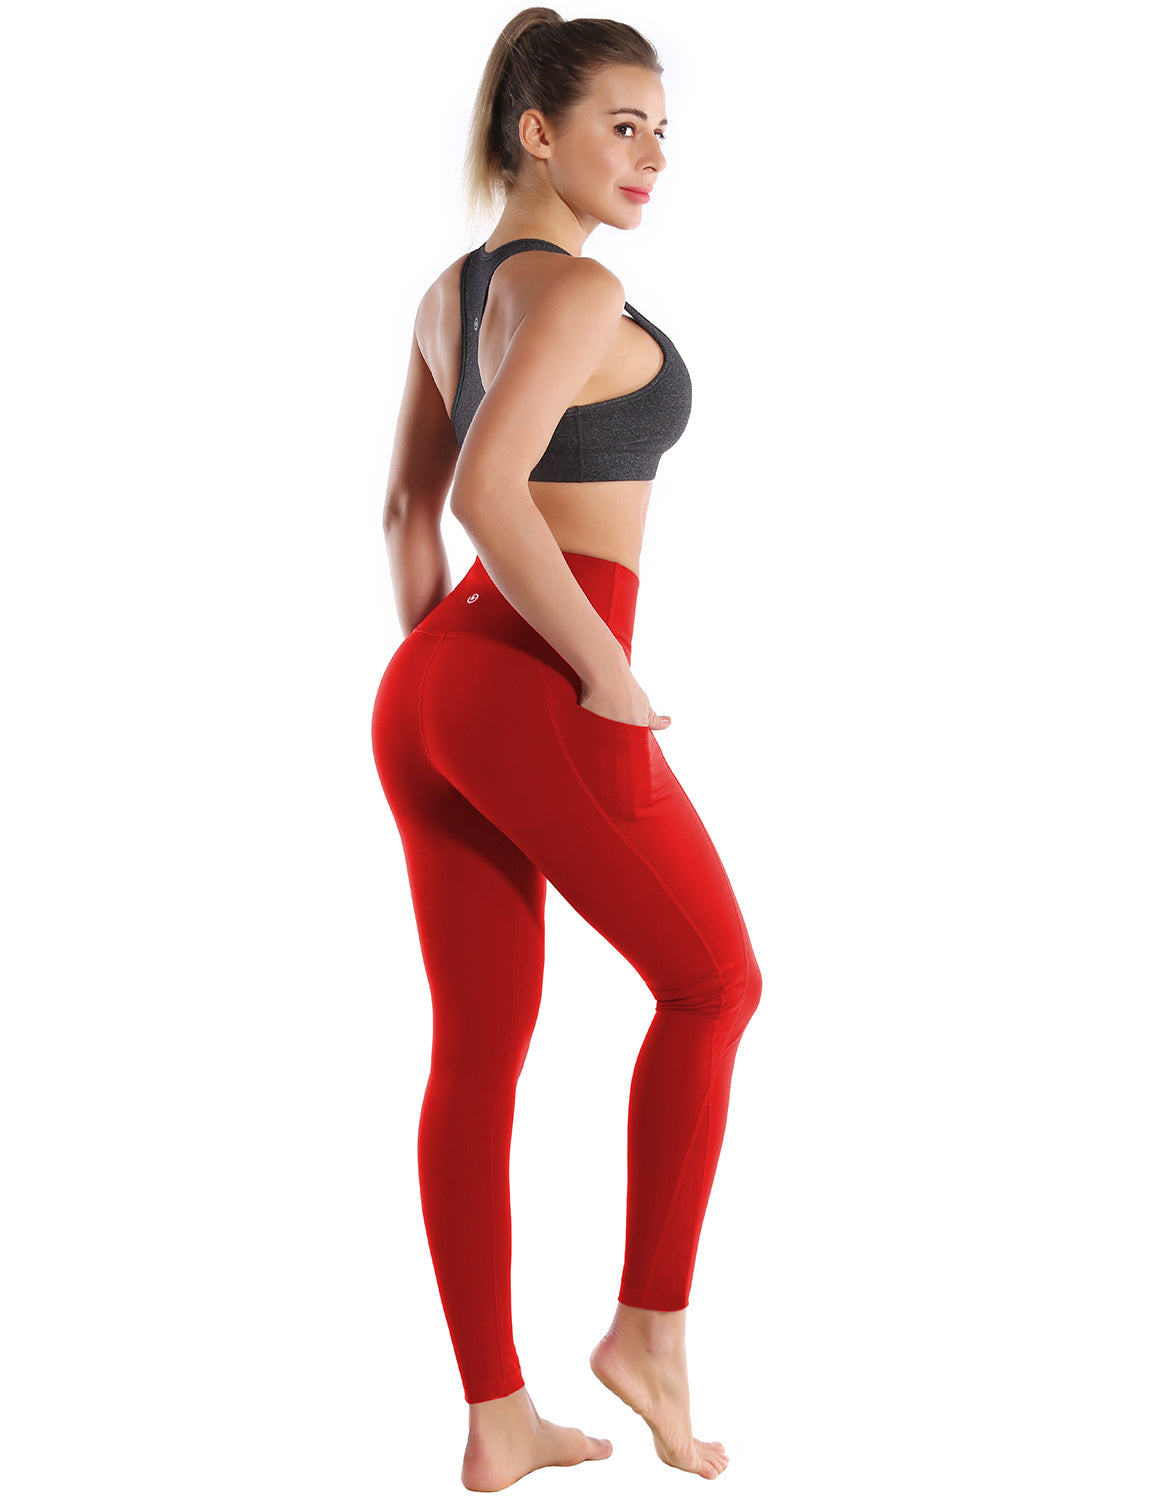 High Waist Side Pockets Yoga Pants scarlet 75% Nylon, 25% Spandex Fabric doesn't attract lint easily 4-way stretch No see-through Moisture-wicking Tummy control Inner pocket